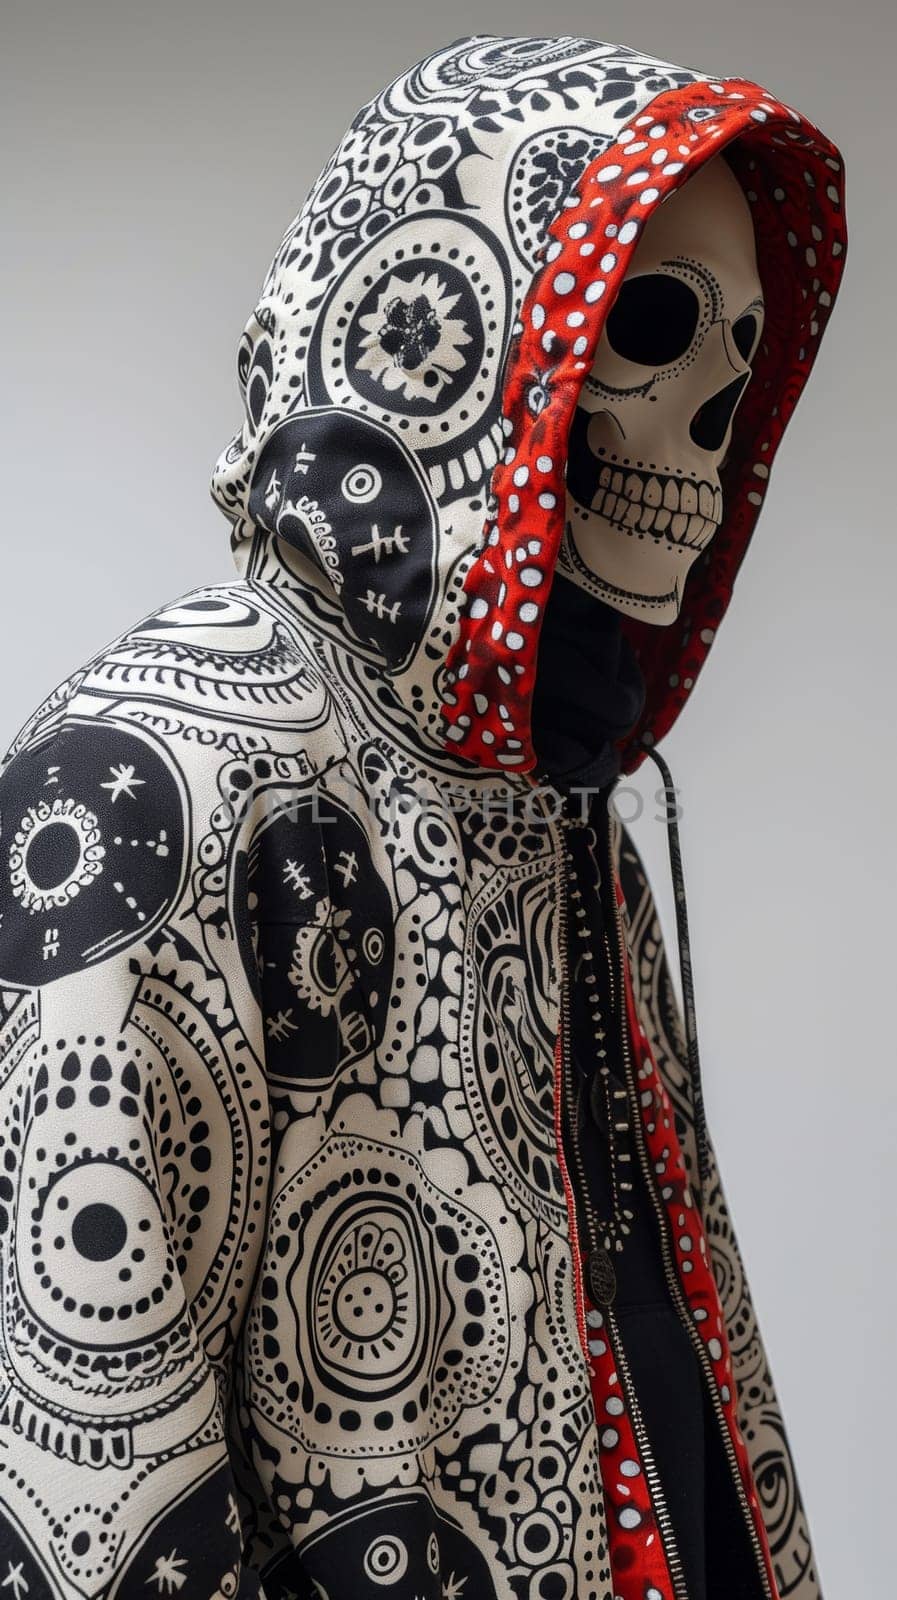 A skeleton wearing a hoodie with red and black patterns